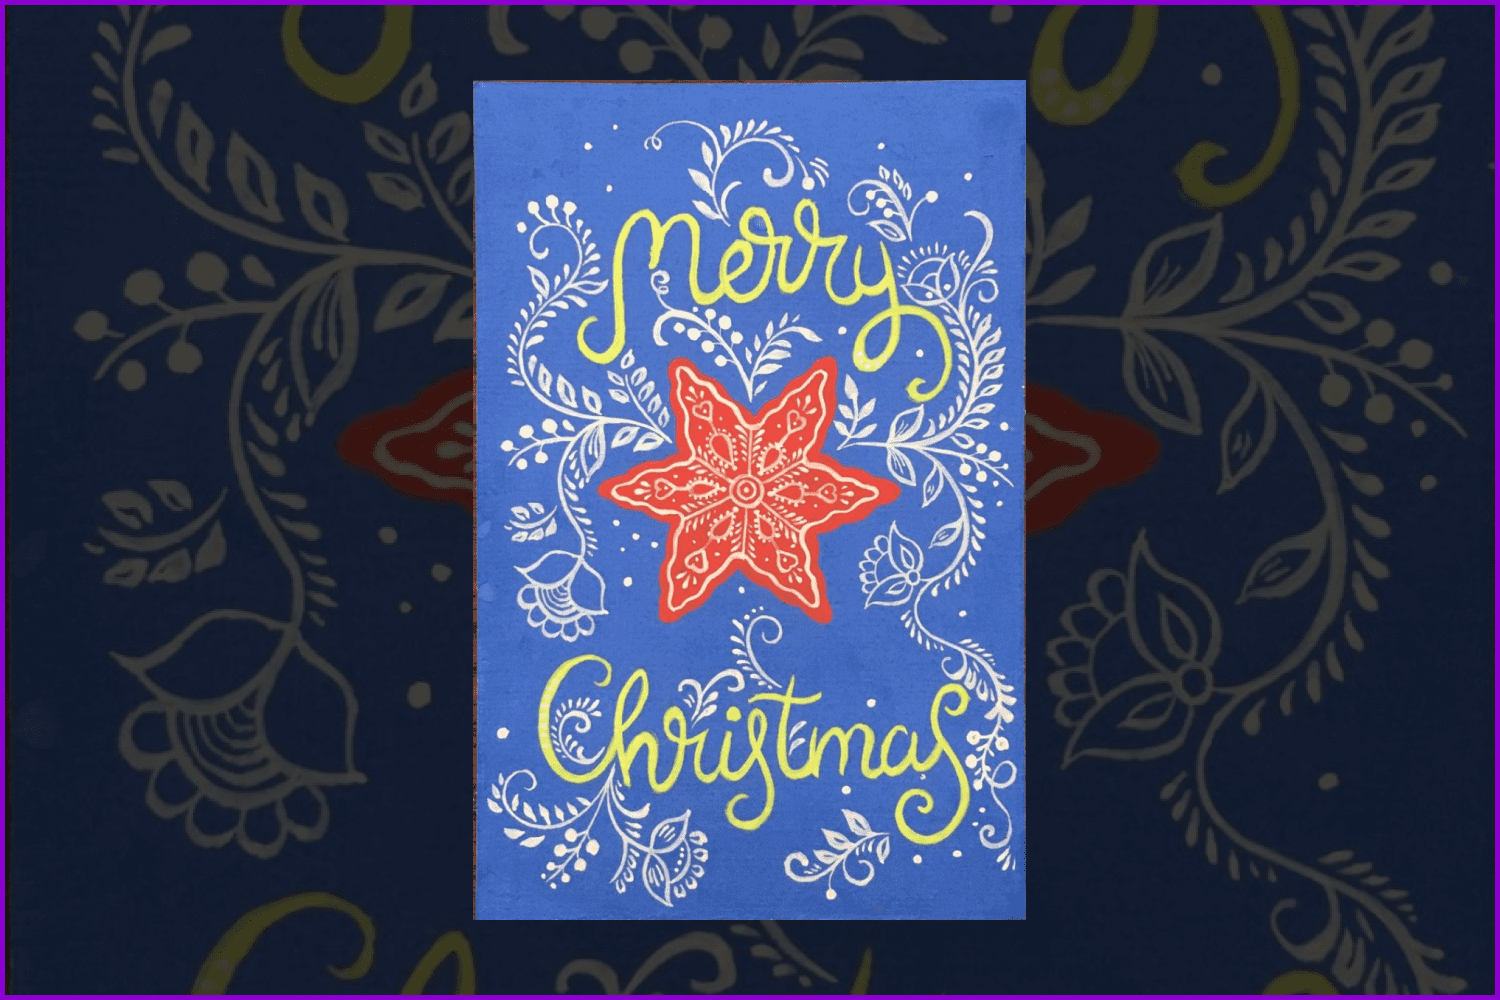 Red star on blue background with sign Merry Christmas.